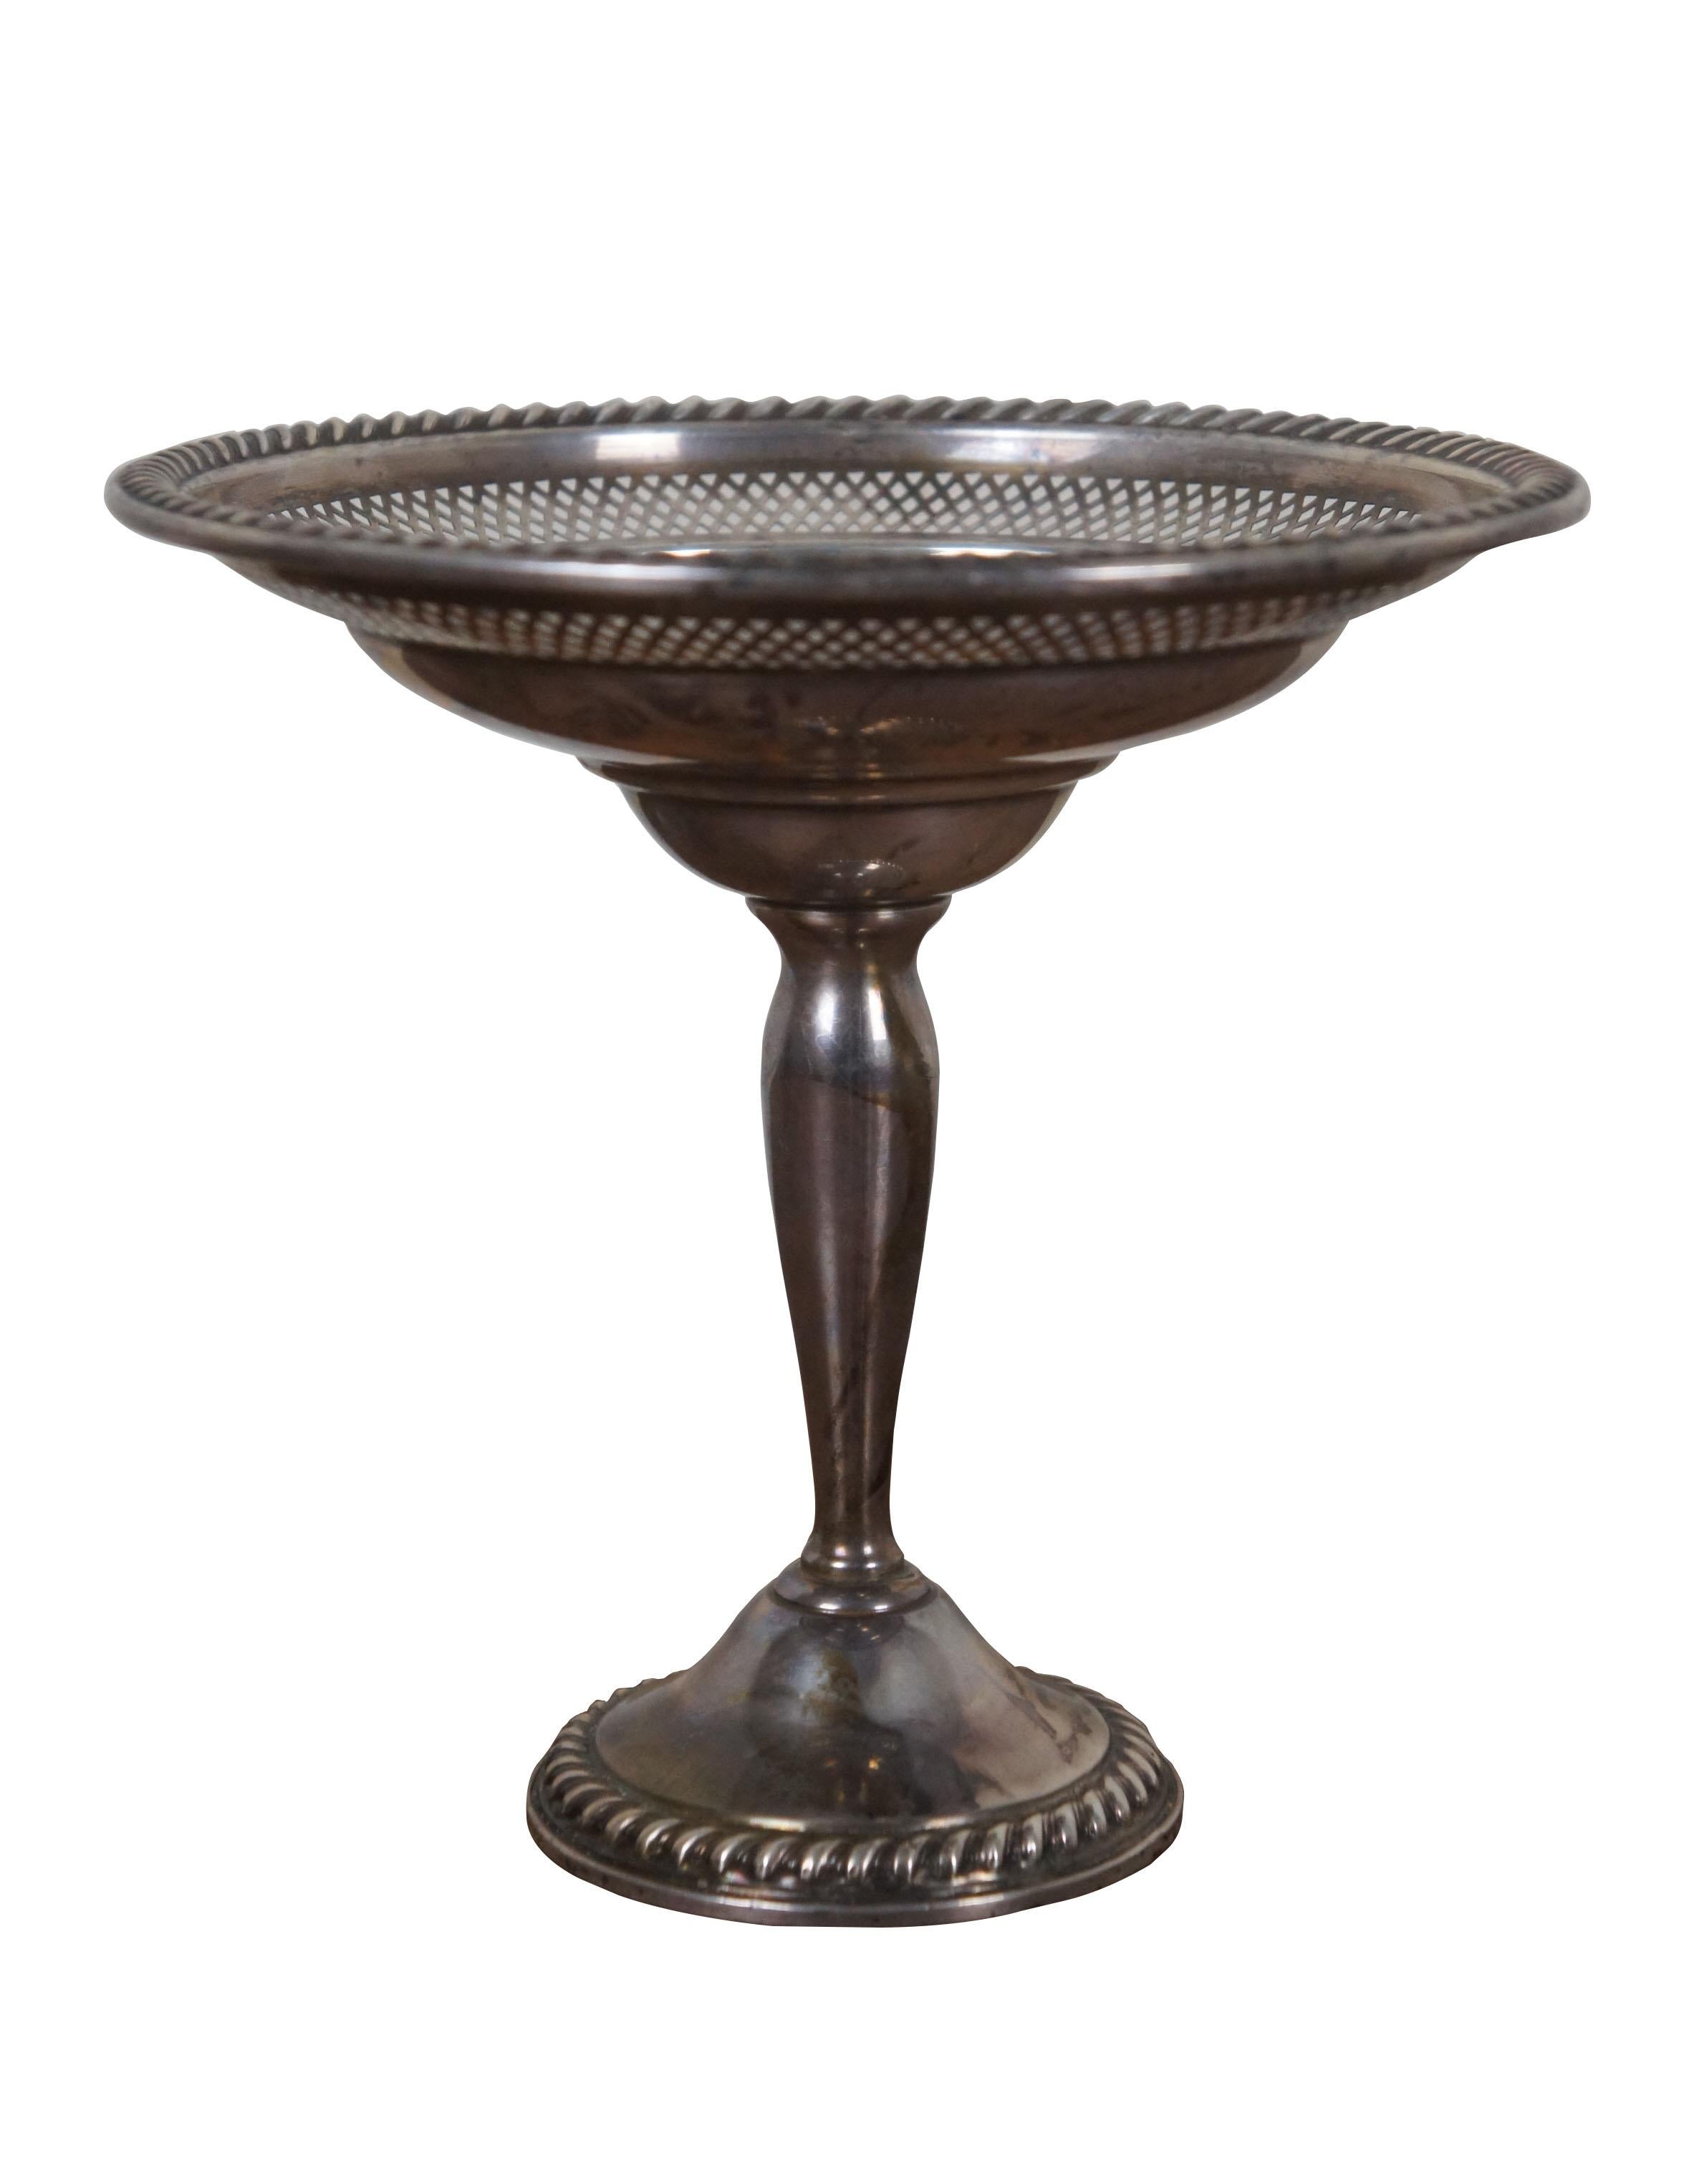 20th century weighted, reinforced, sterling silver number 32 Cornwell compote by Watrous Mfg Co. Pedestal style nut / candy dish with rope twist border and pierced reticulated lattice detail.

WATROUS MFG. CO, The business known as the Watrous Mfg.